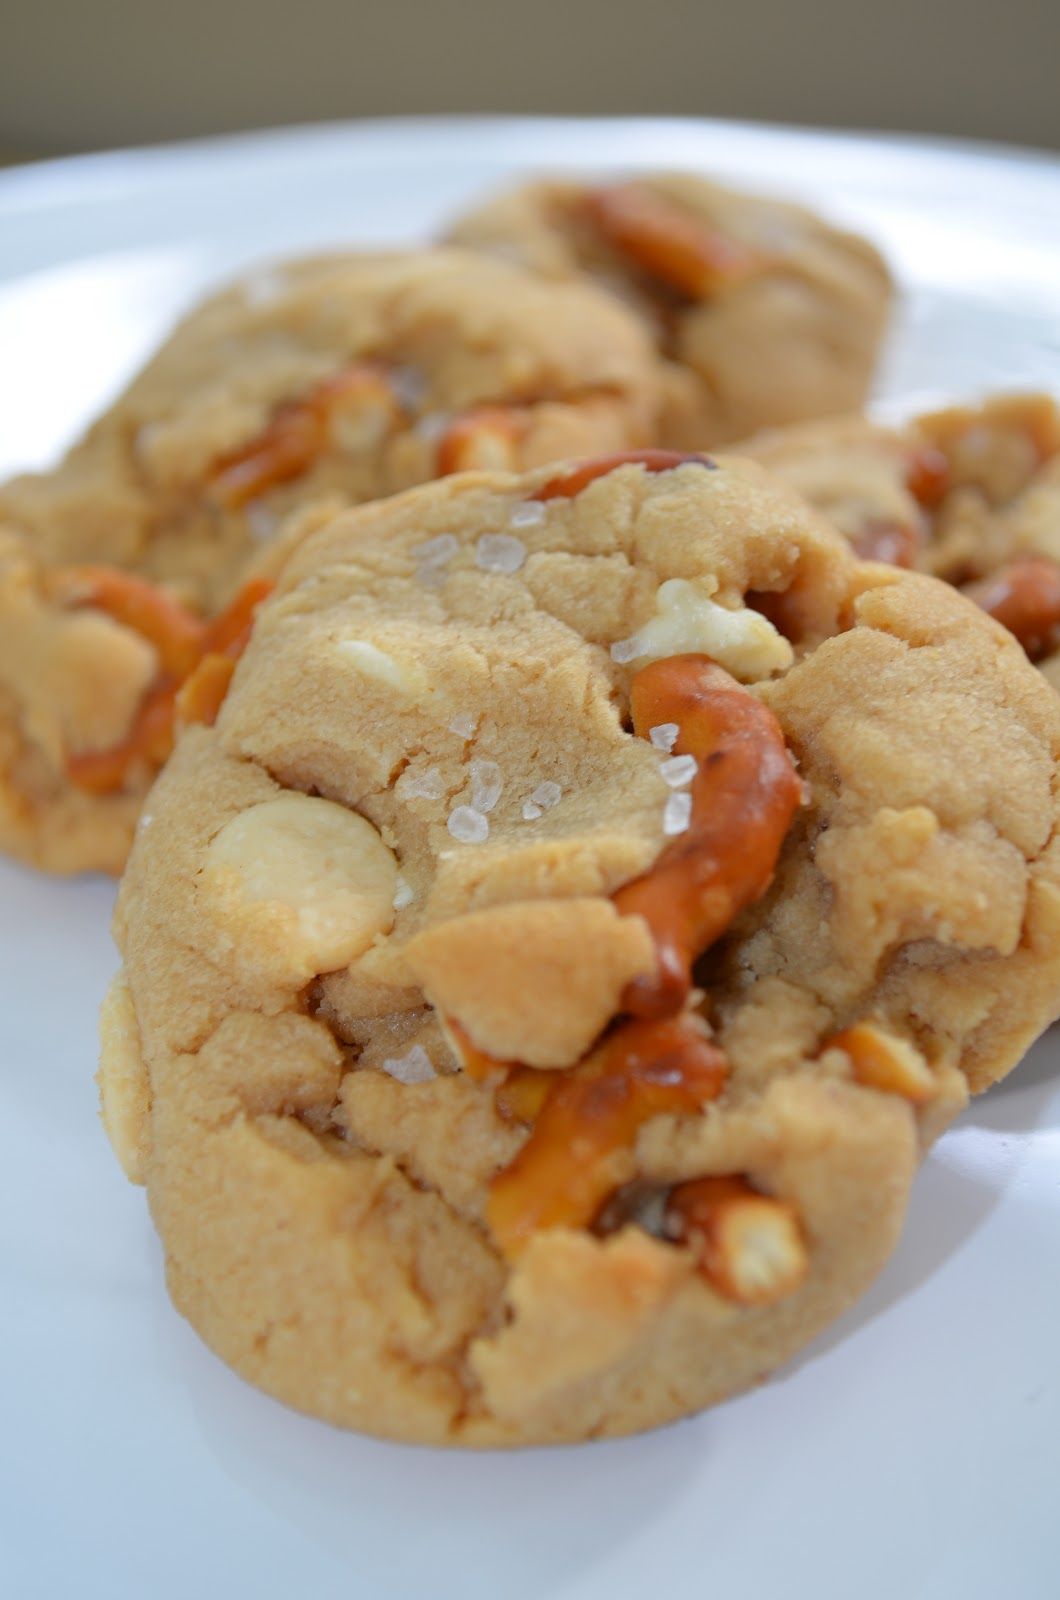 The Sweet & Salty. Peanut Butter Cookie loaded with pretzels, white chocolat